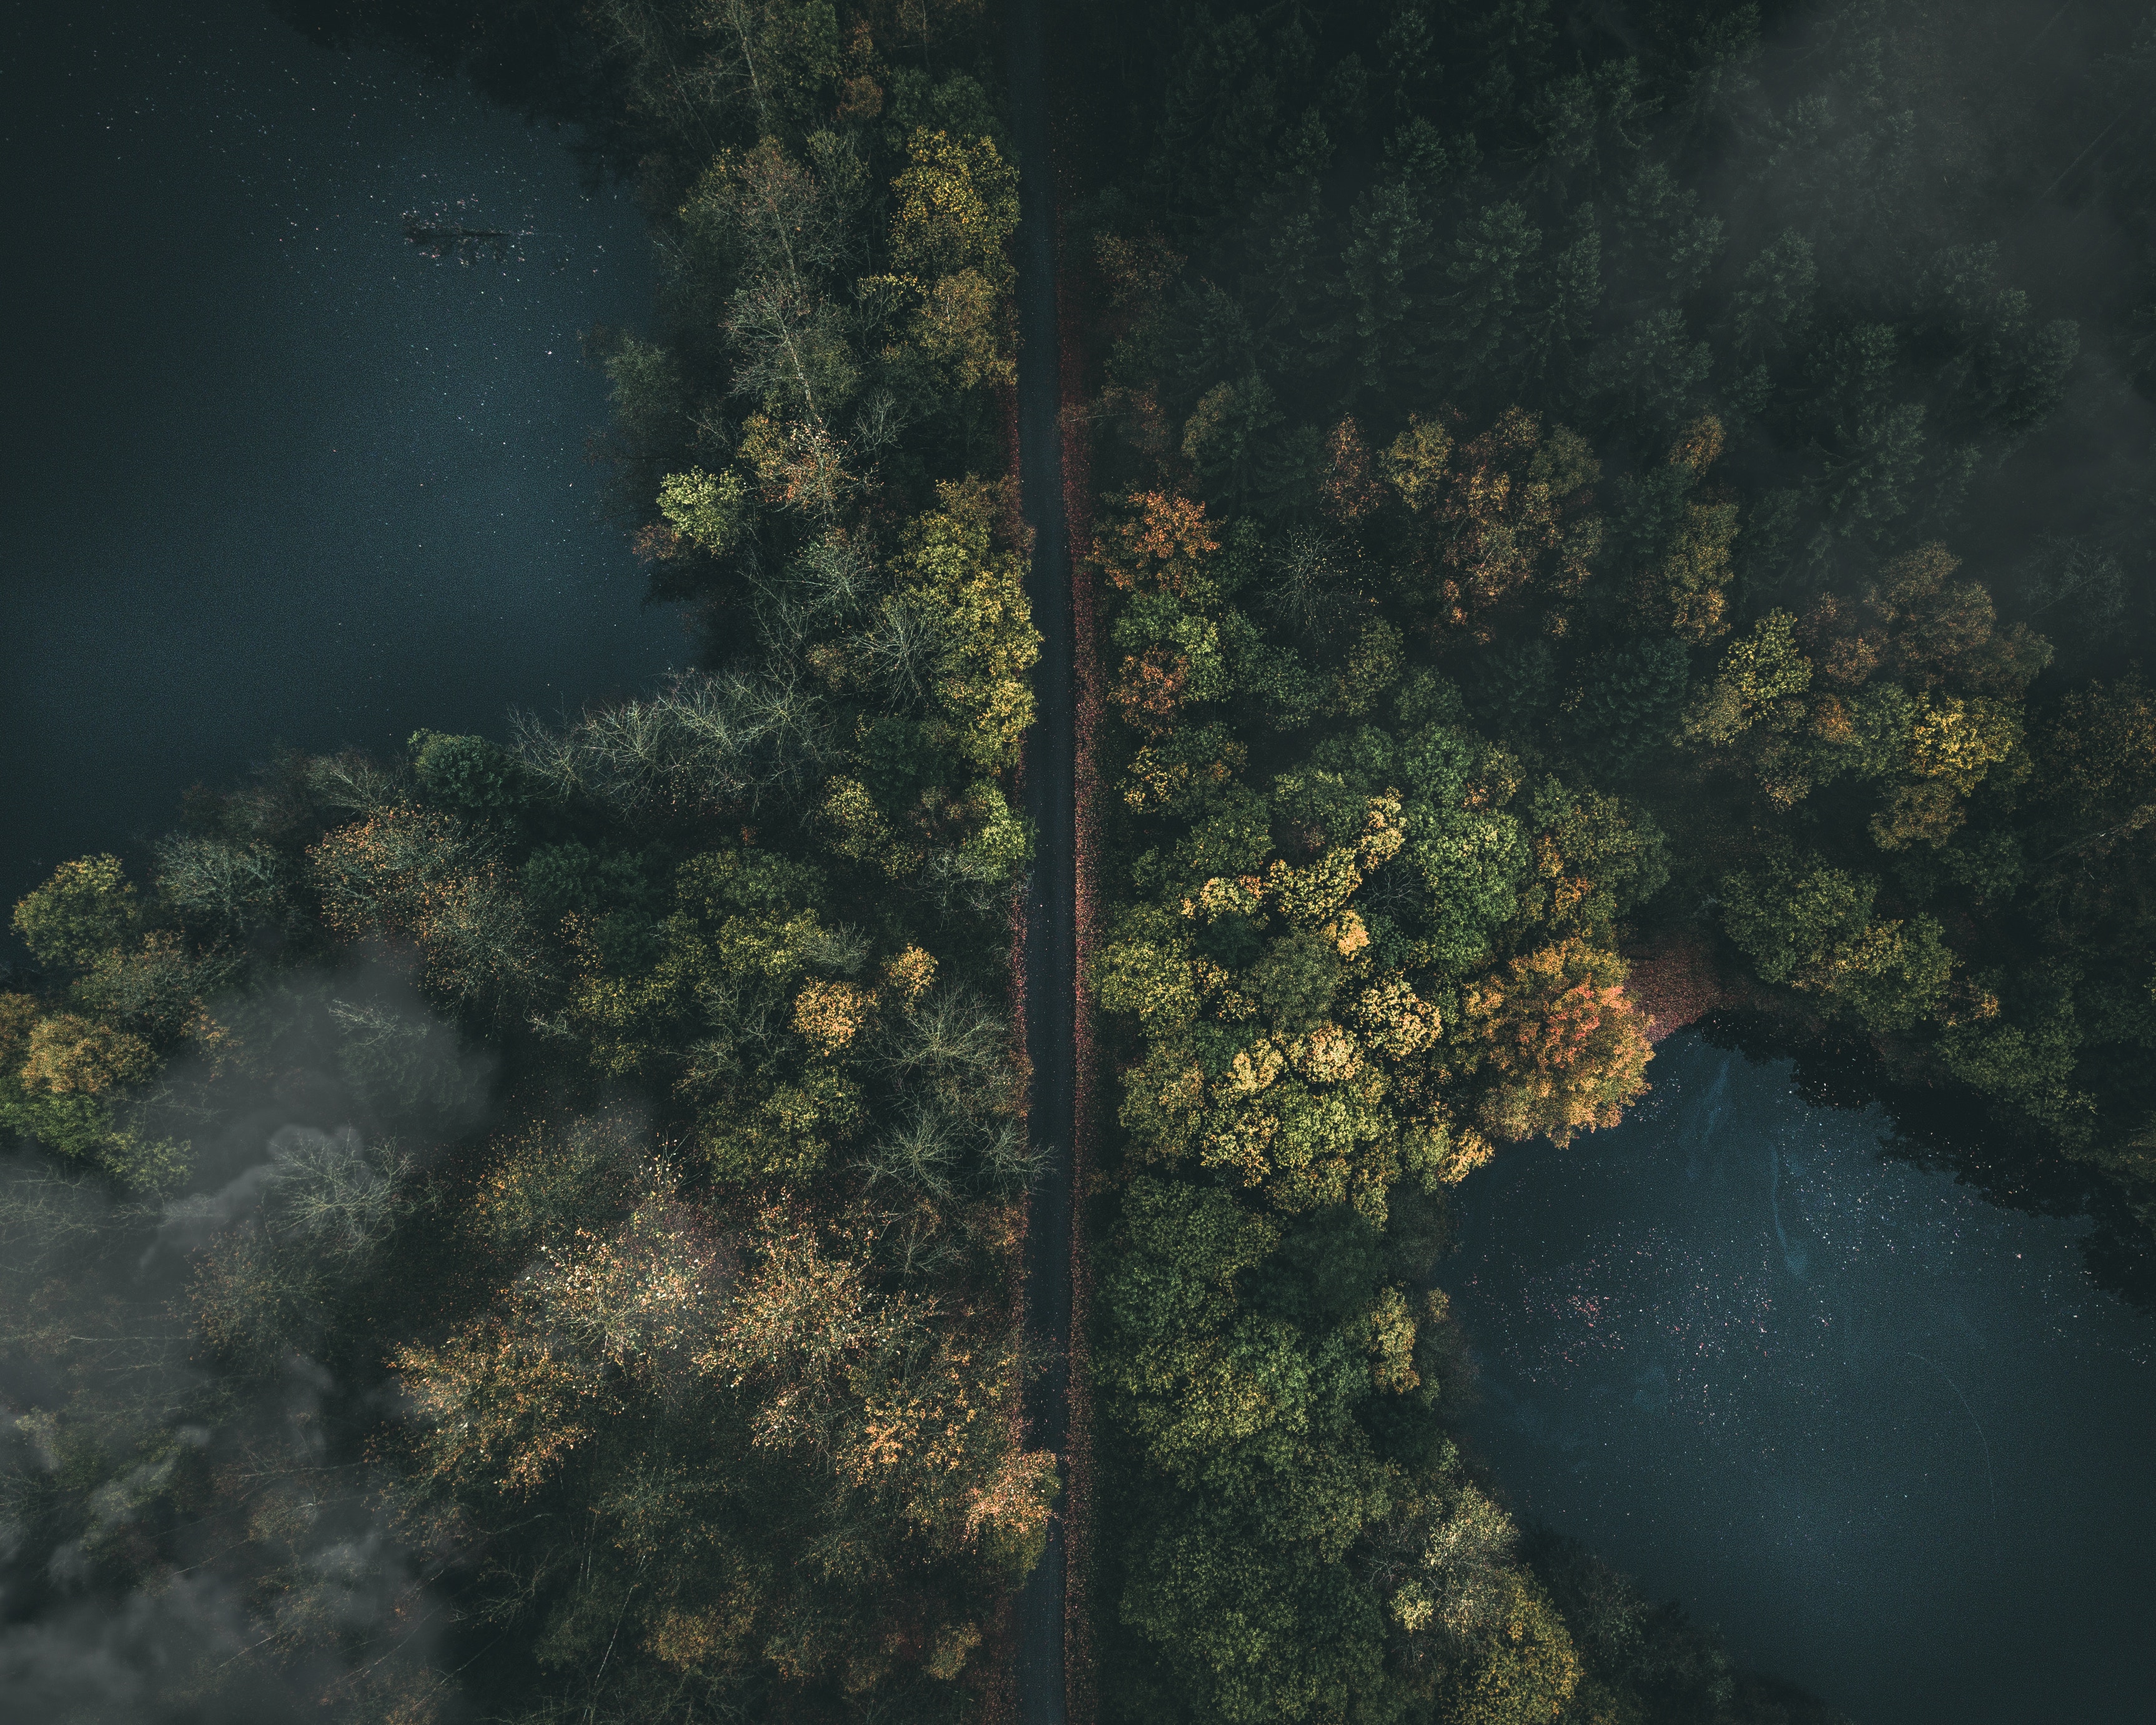 view from above, nature, road, forest, fog Image for desktop